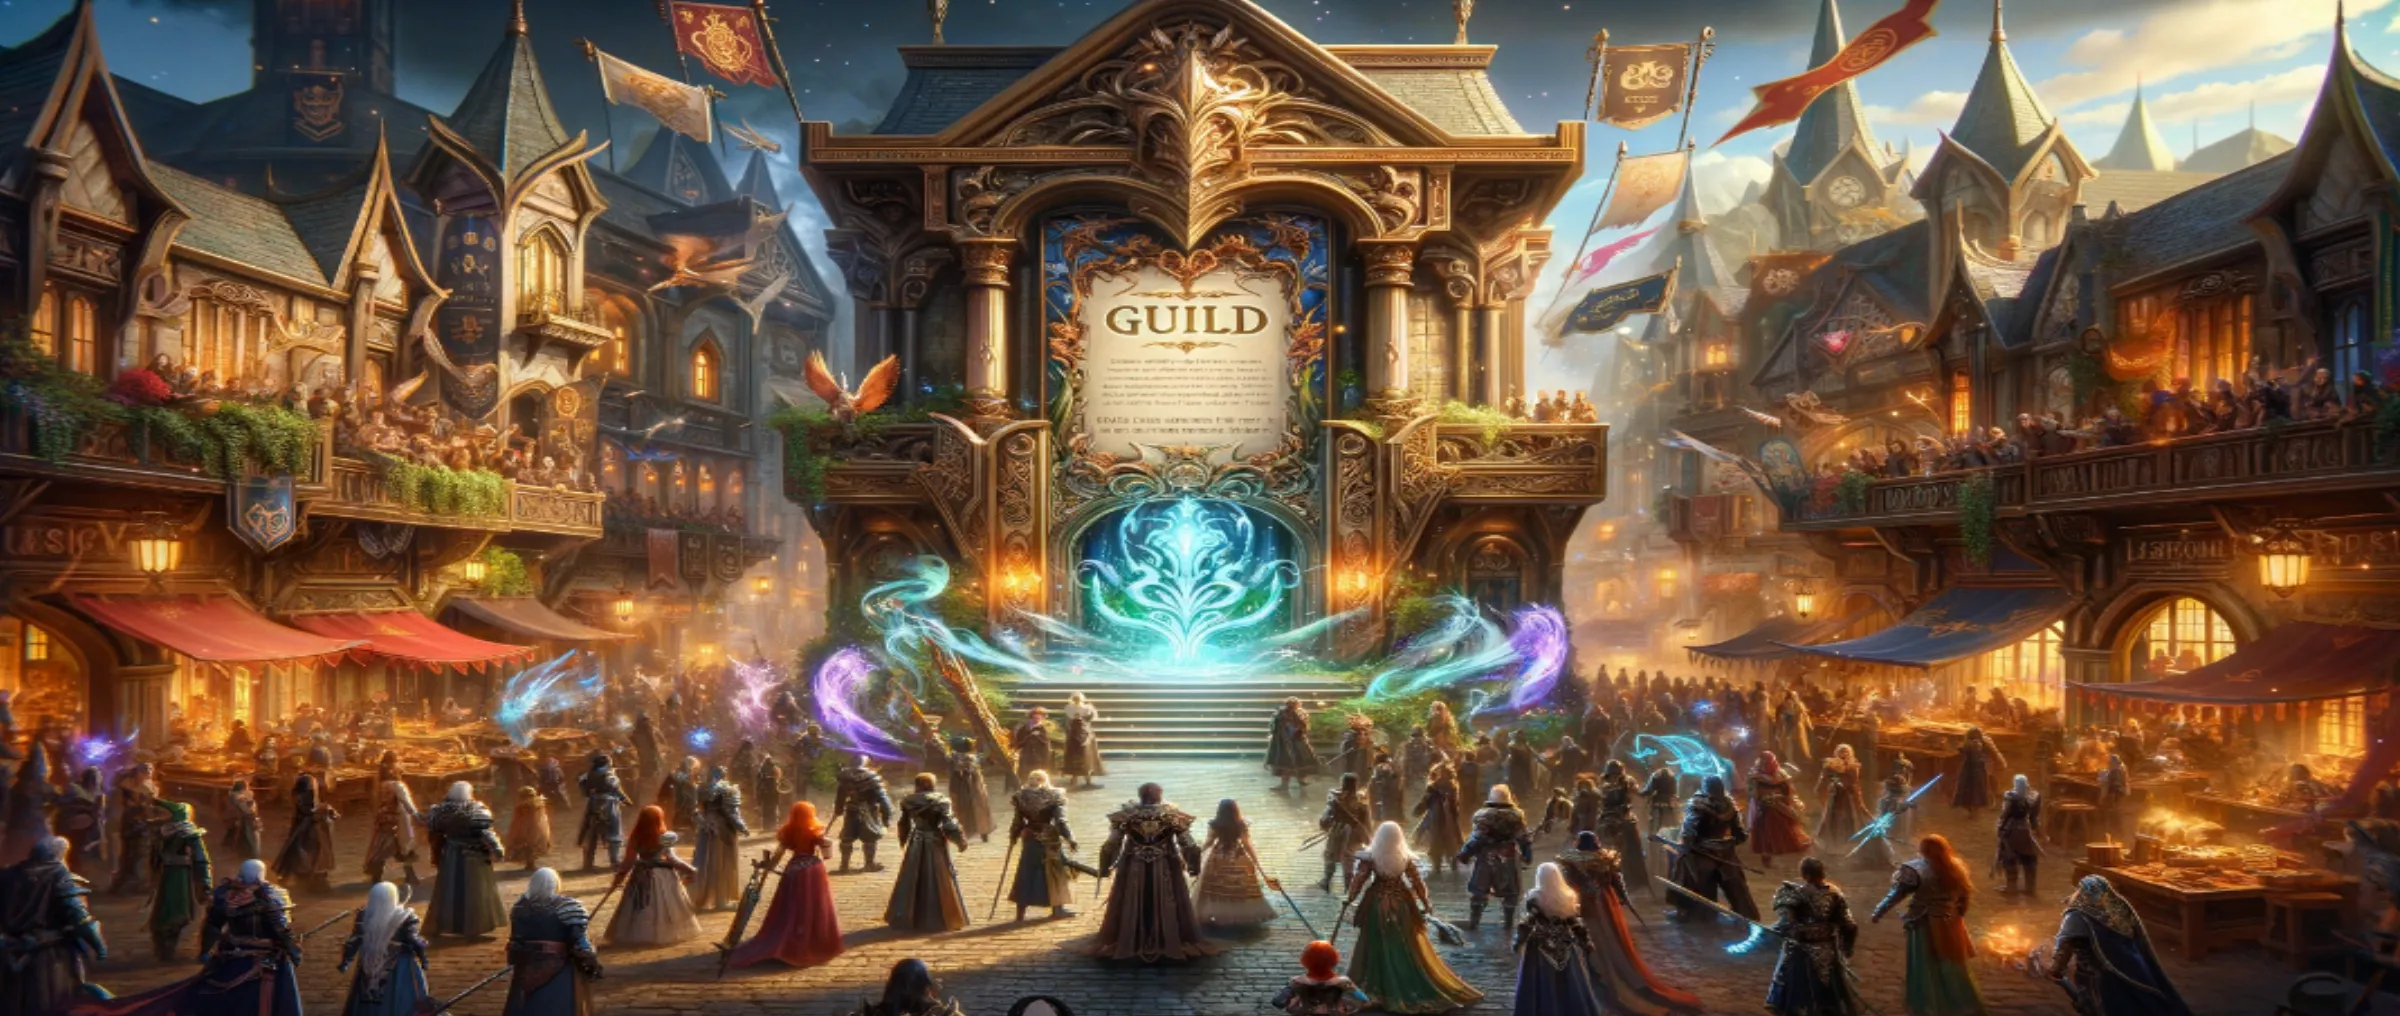 Gala Games Introduces a New Guild Feature in the Common Ground Game World